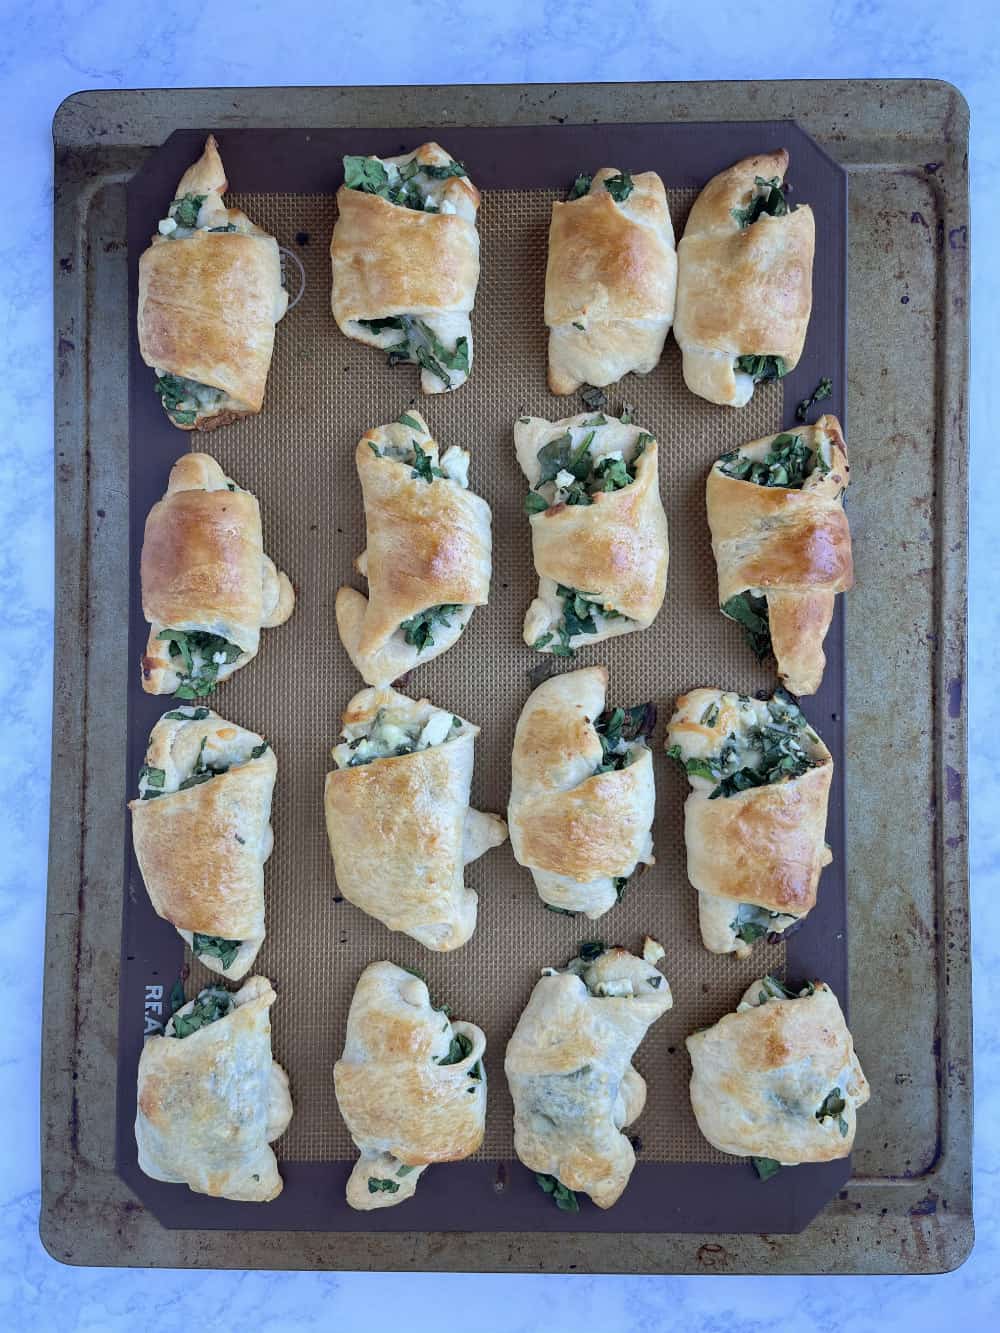 https://www.chocolateslopes.com/wp-content/uploads/2022/09/cheese-spinach-crescent-roll-ups.jpg